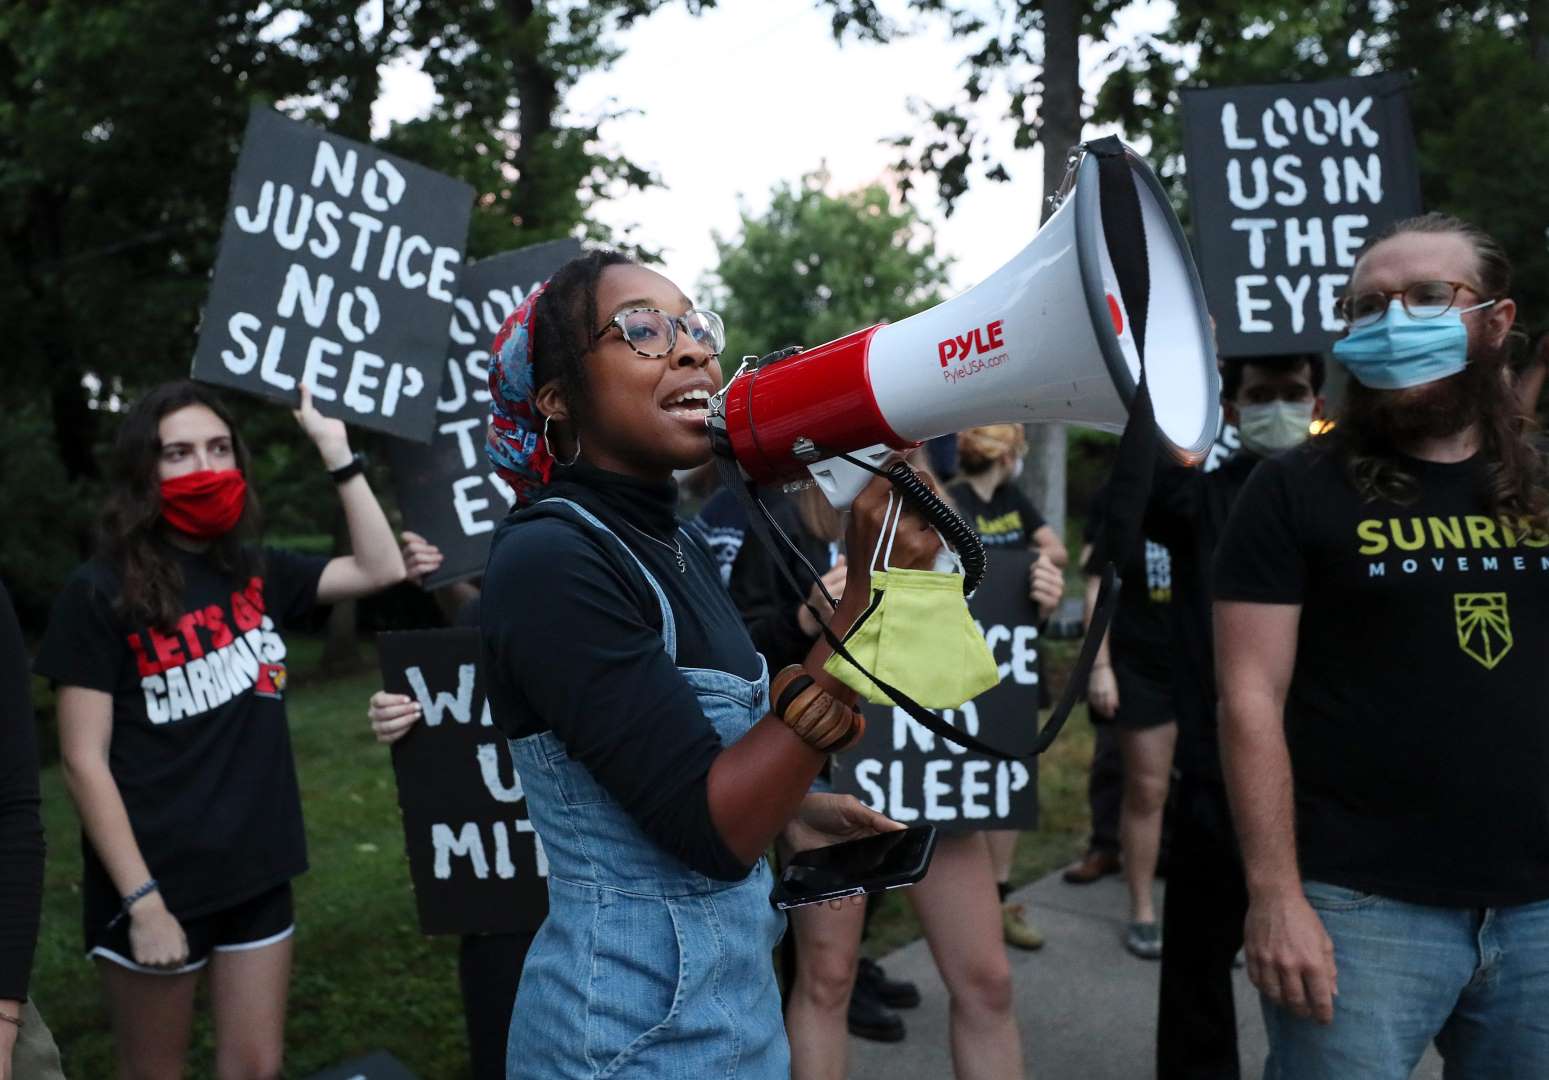 A Sunrise activist speaks into a megaphone while fellow protesters stand behind holding signs saying "No Justice No Sleep" and "Look Us In The Eyes".